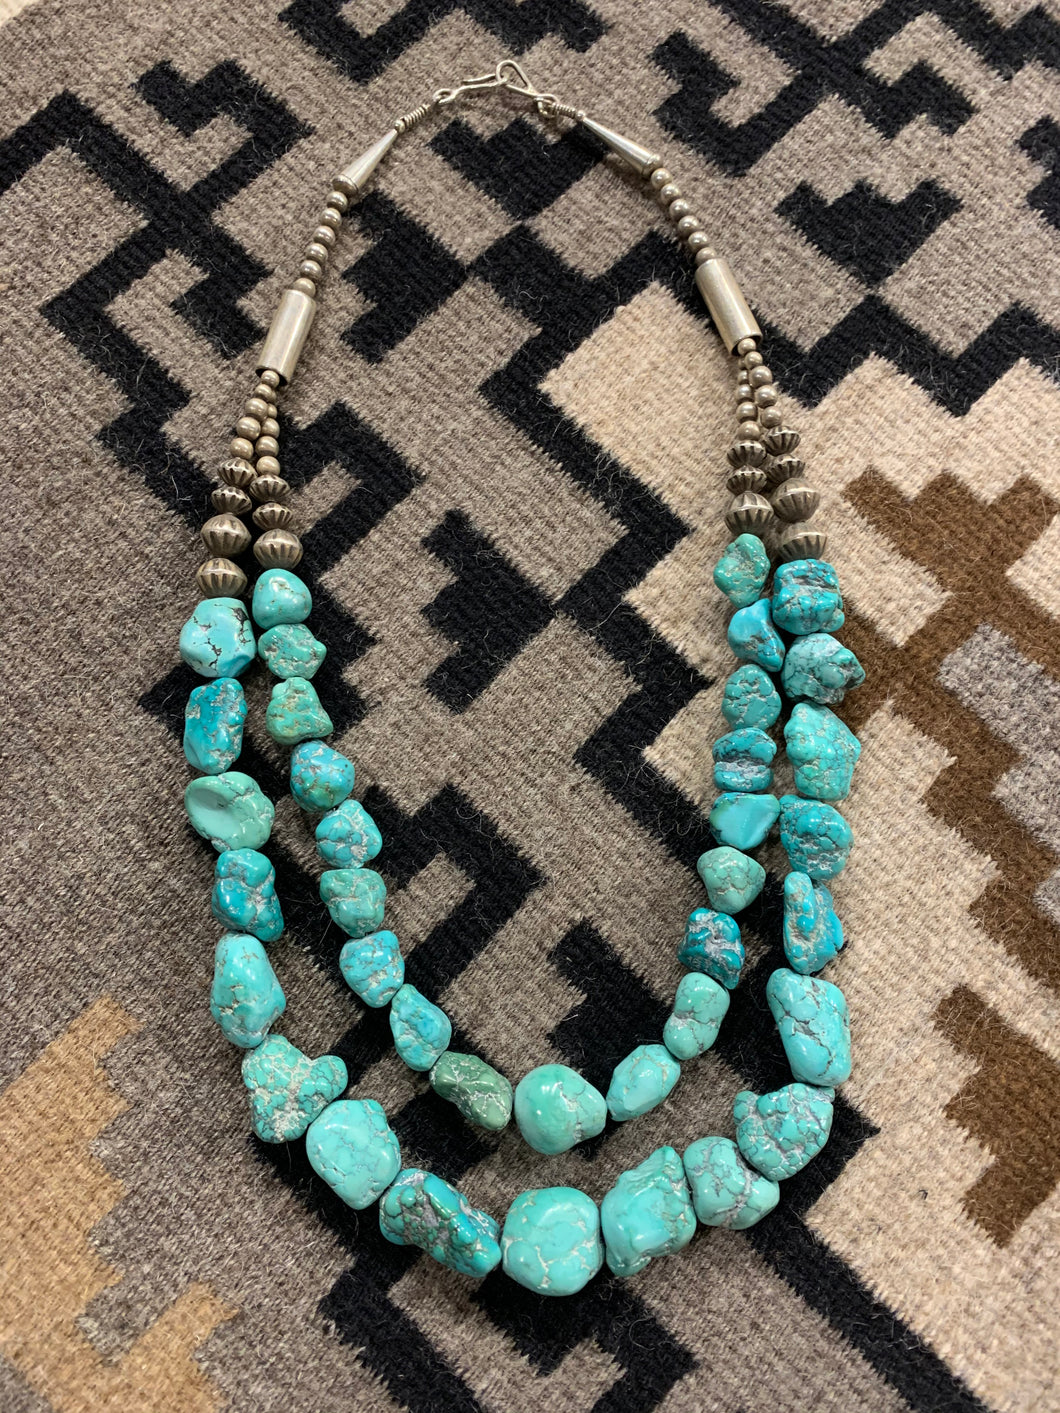 Very Bold Chunky Turquoise Necklace. Iris Apfel Style | Turquoise necklace,  Gemstone beaded necklace, Turquoise jewelry native american